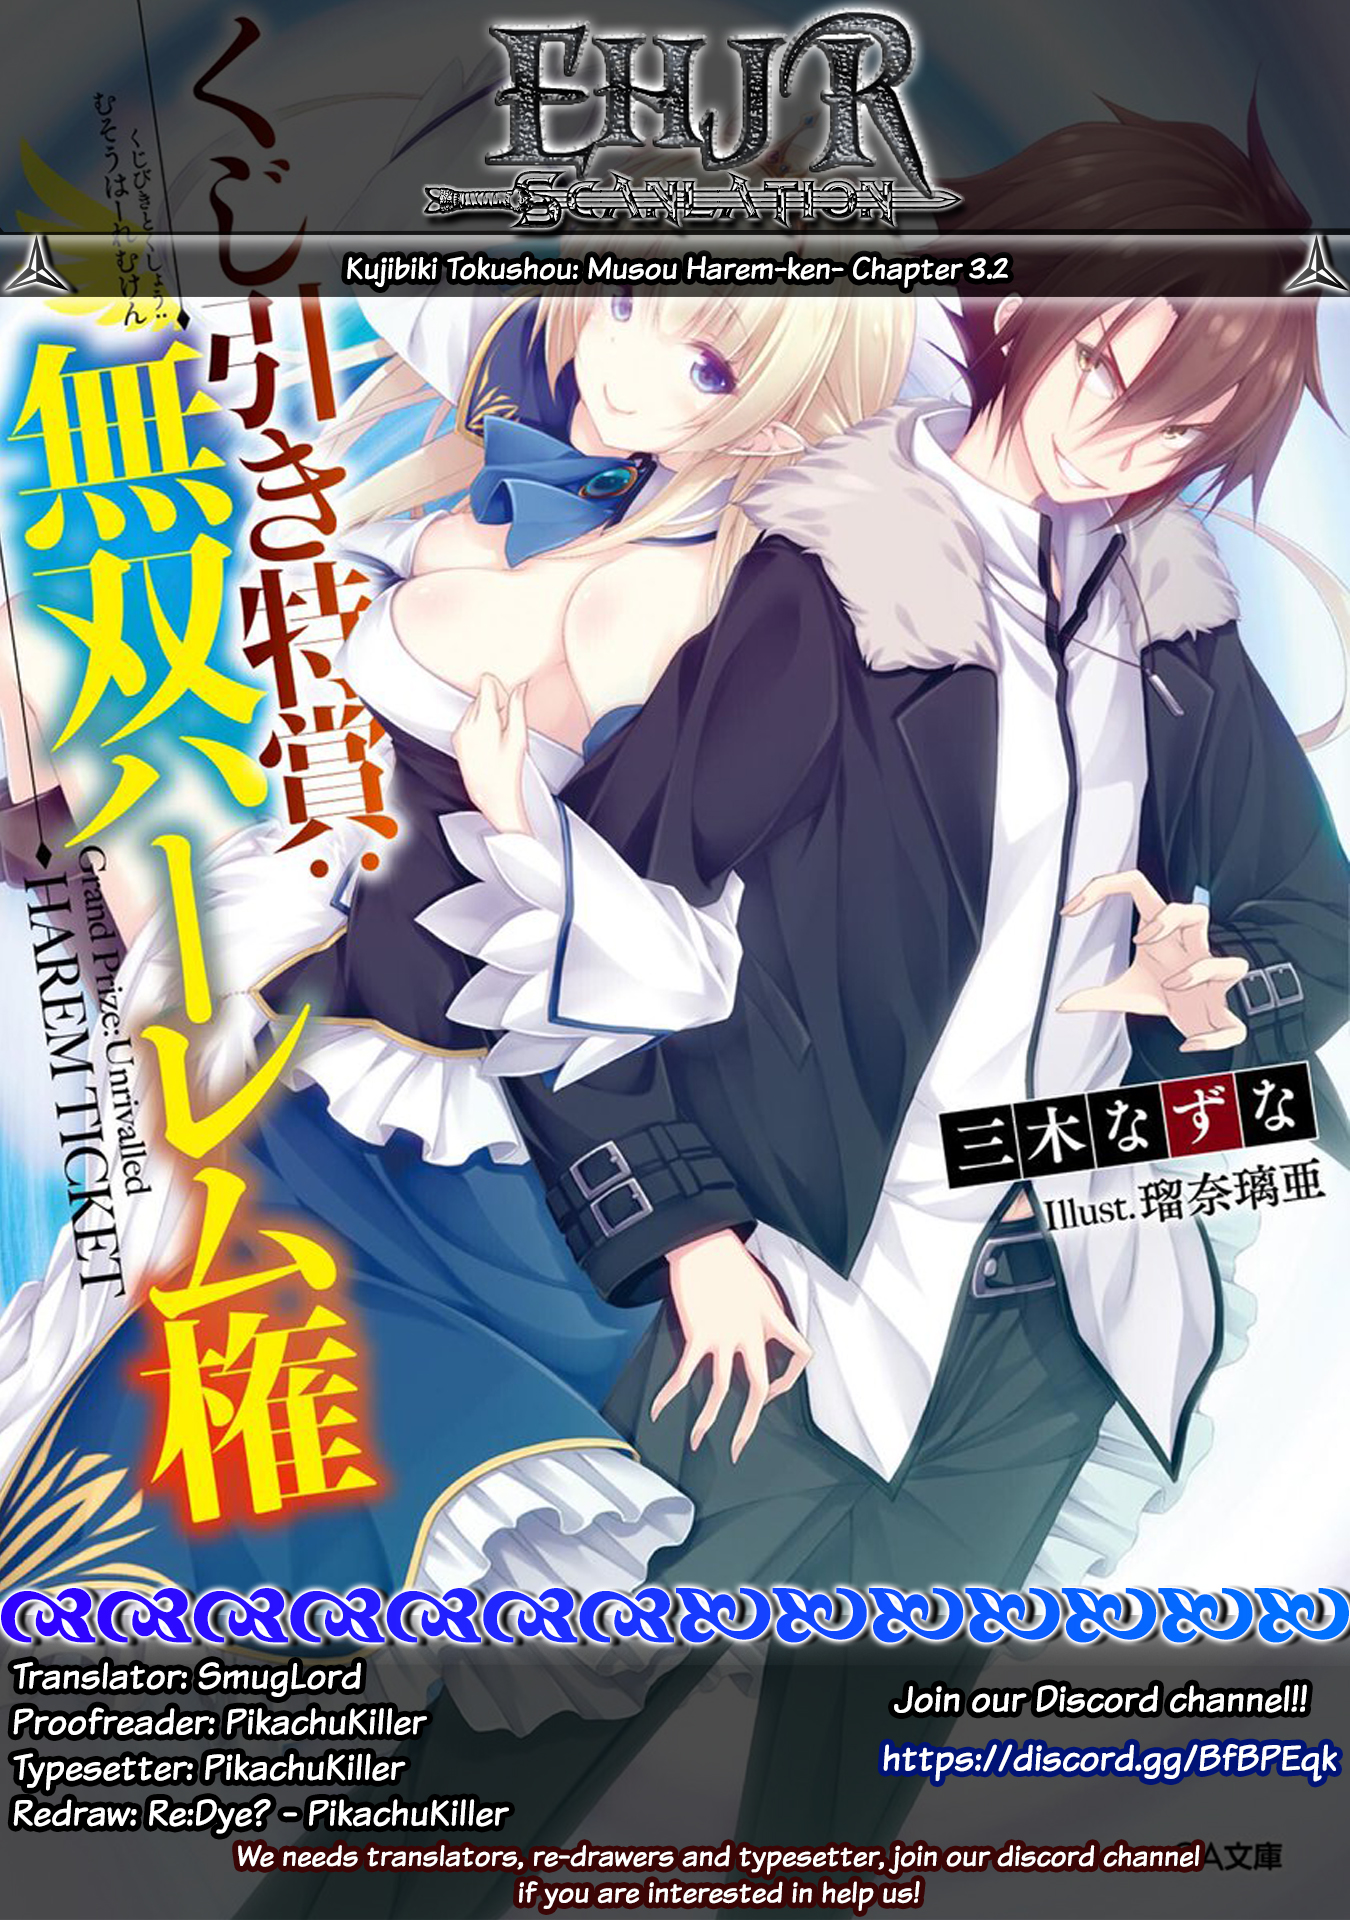 Kujibiki Tokushou Musou Harem-ken Chapter 3.2: By exterminating bad guys, lottery tickets will increase! - Part 2